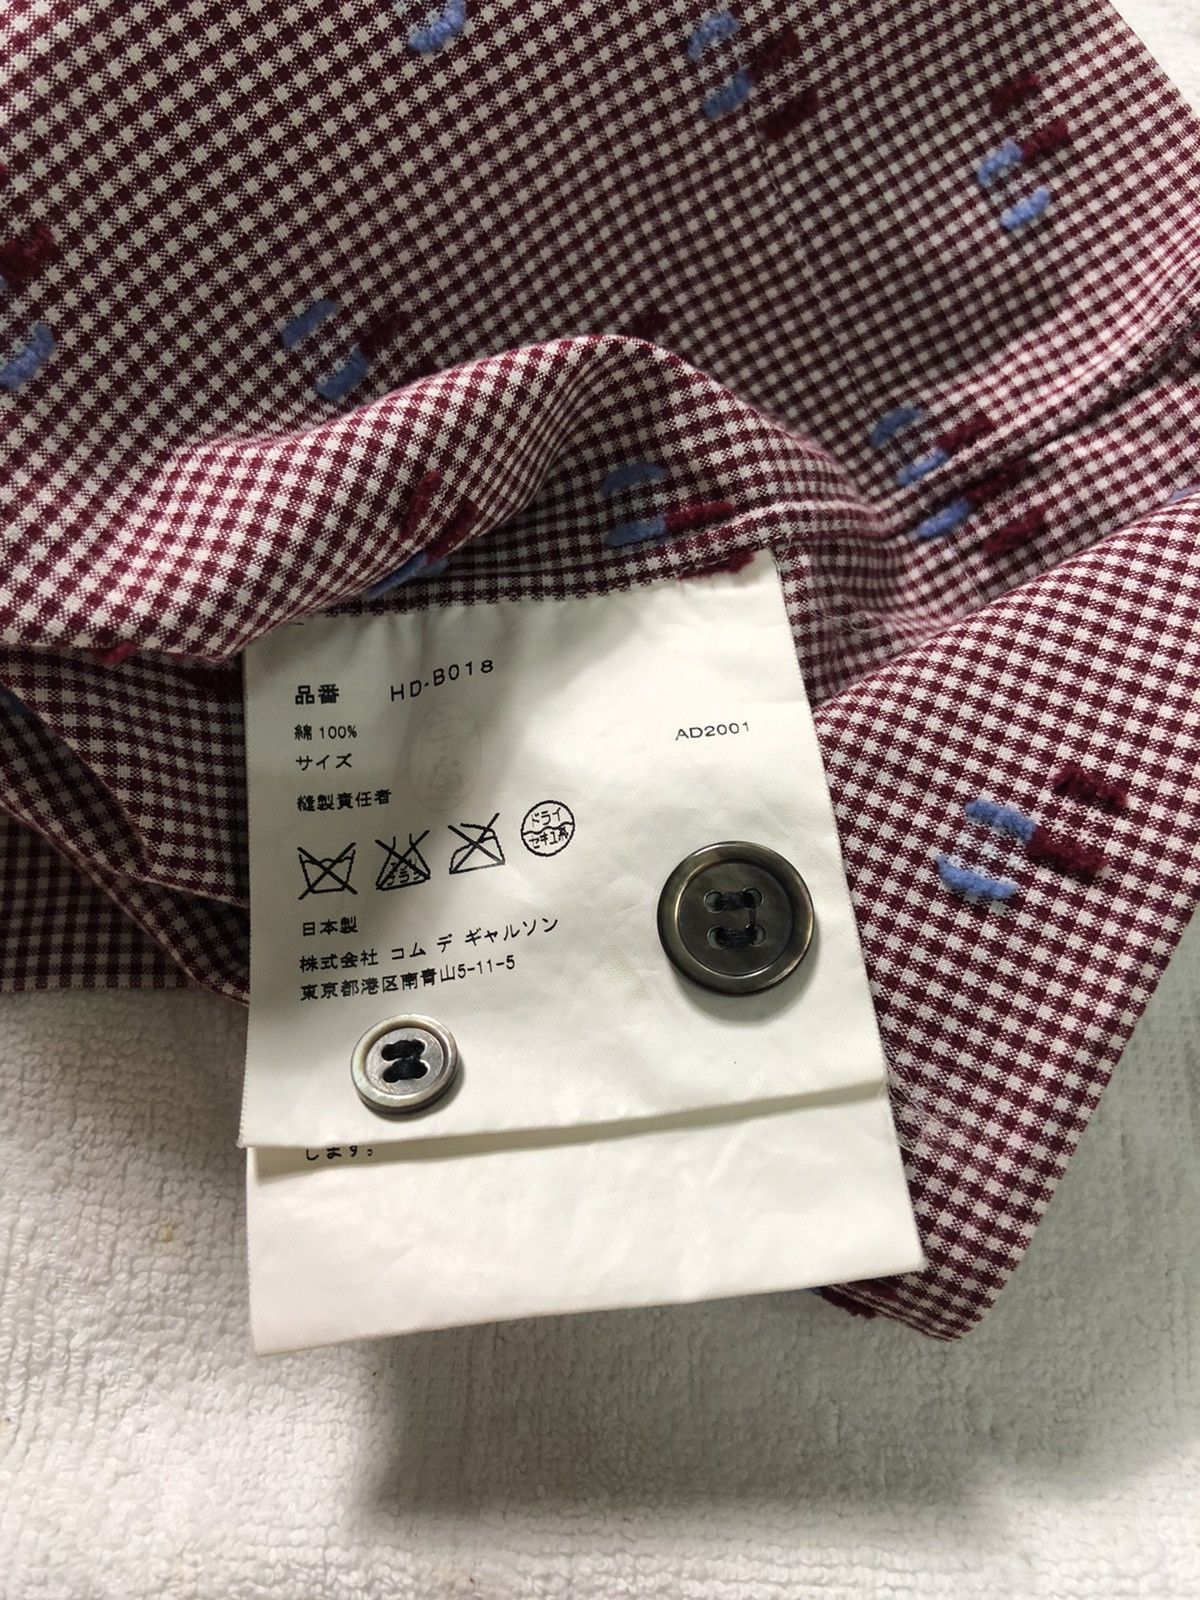 AW02 Comme Des Garcons Small Box Longsleeve Shirt - 8